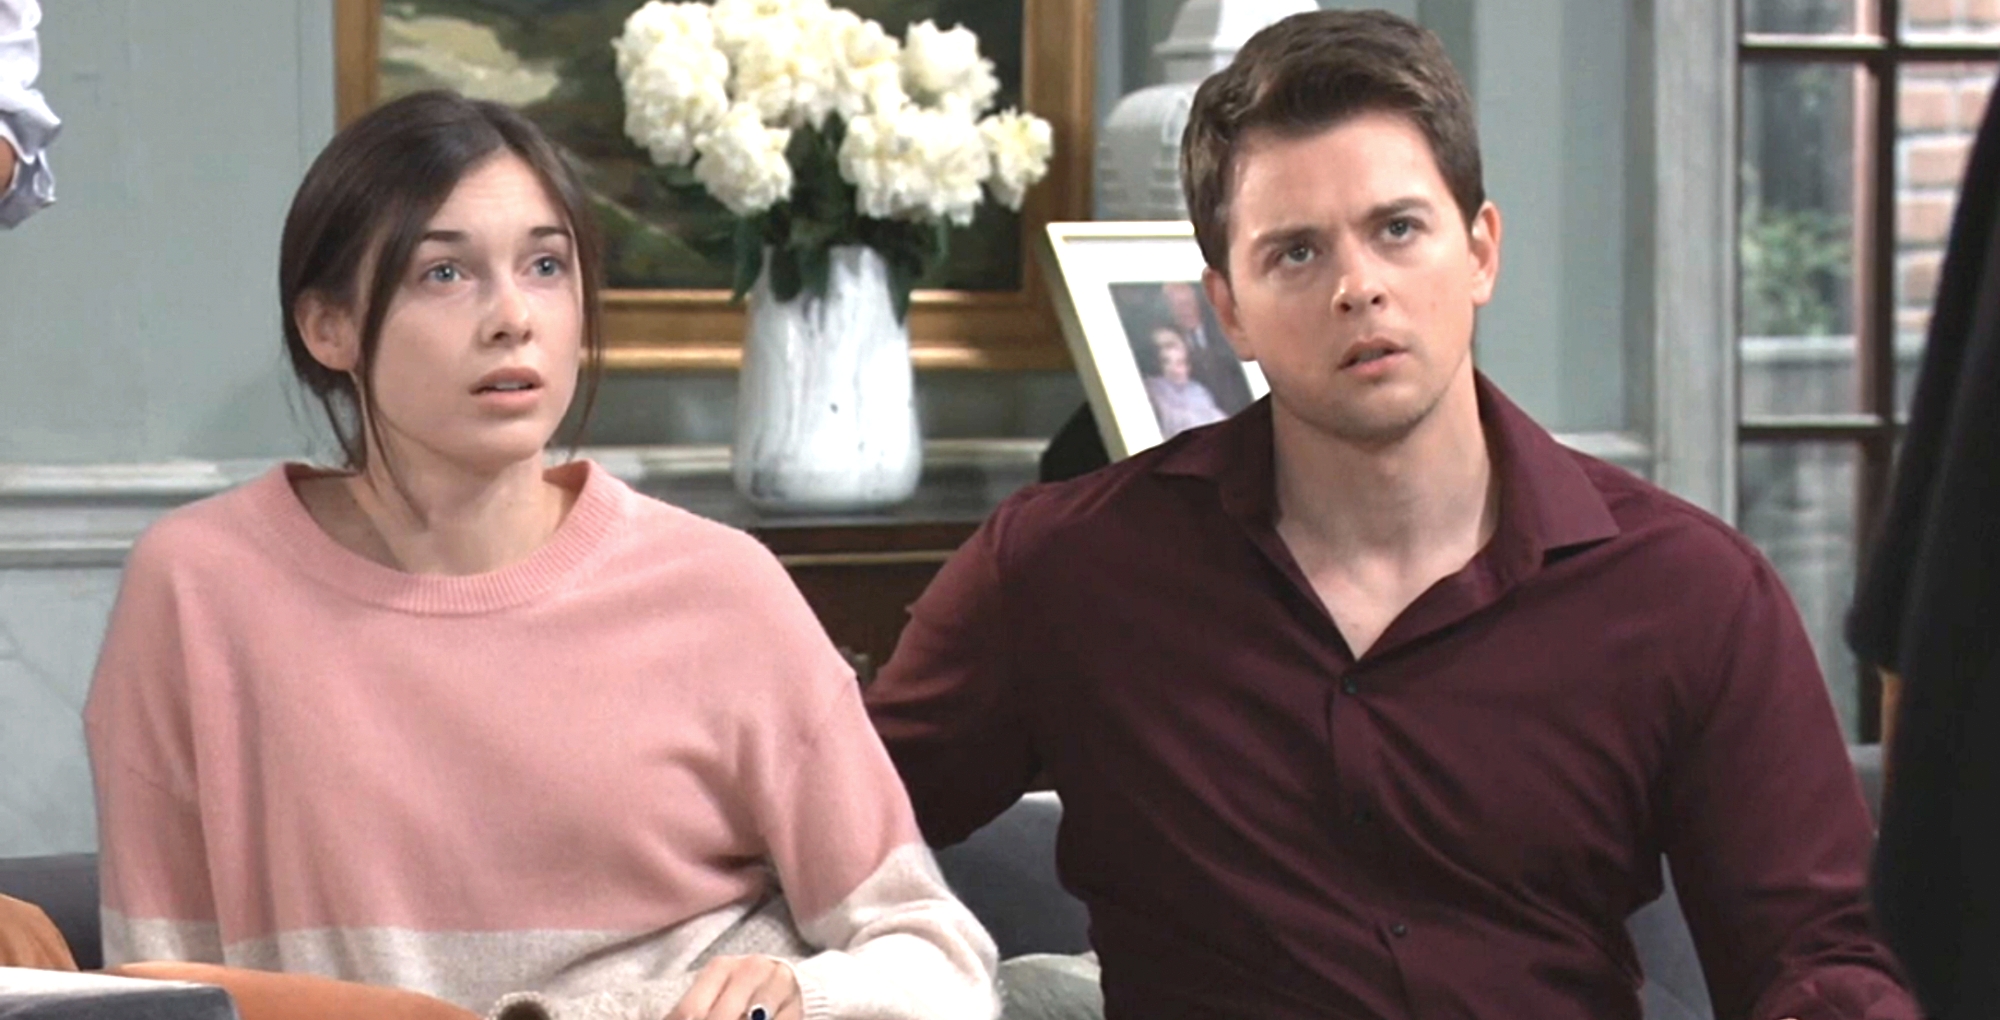 general hospital recap for march 16, 2023, has willow tait and michael anxious for news